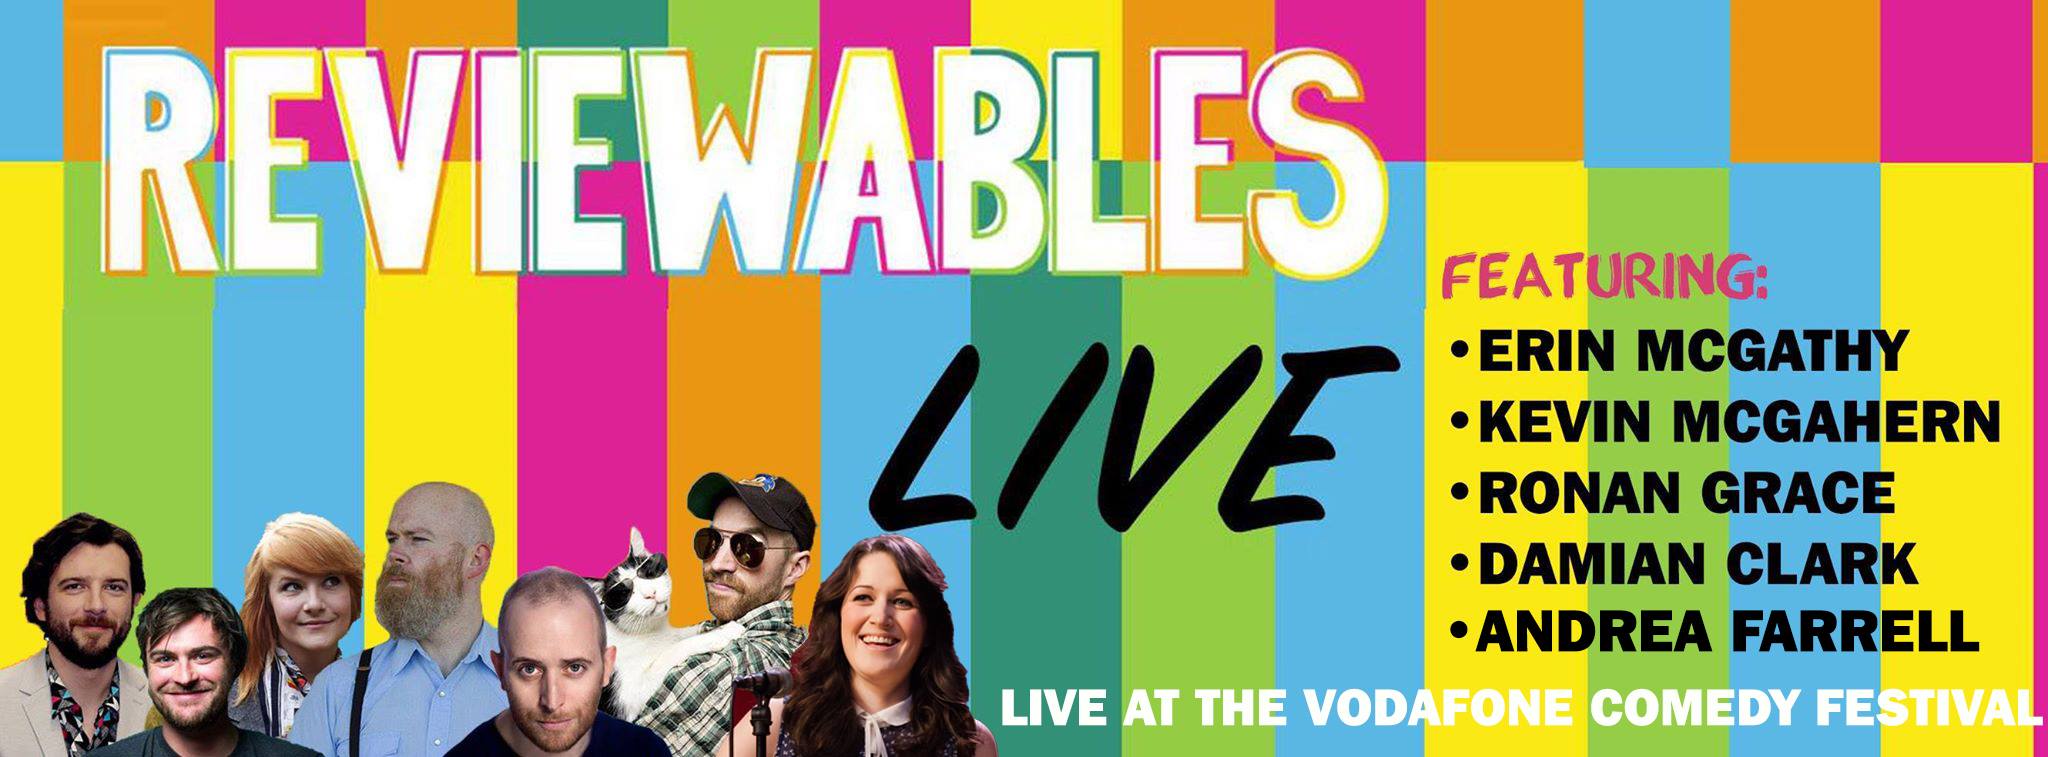 Reviewables Live at Vodafone Comedy Festival 2017 - HeadStuff.org